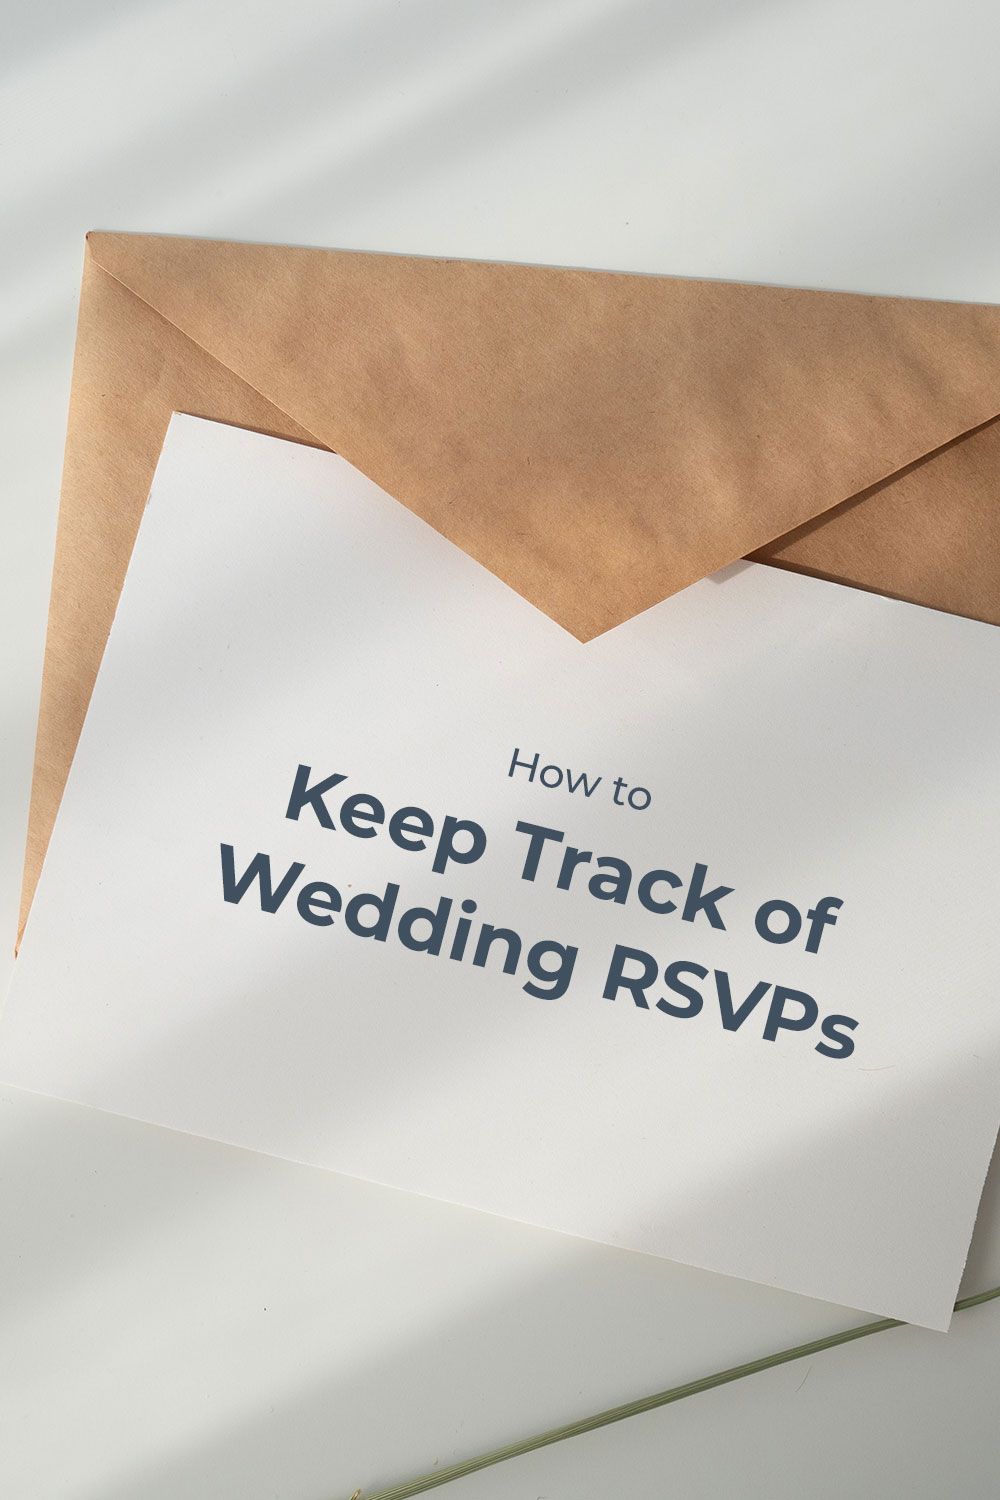 Keep Track Of Wedding RSVPs In 4 Steps